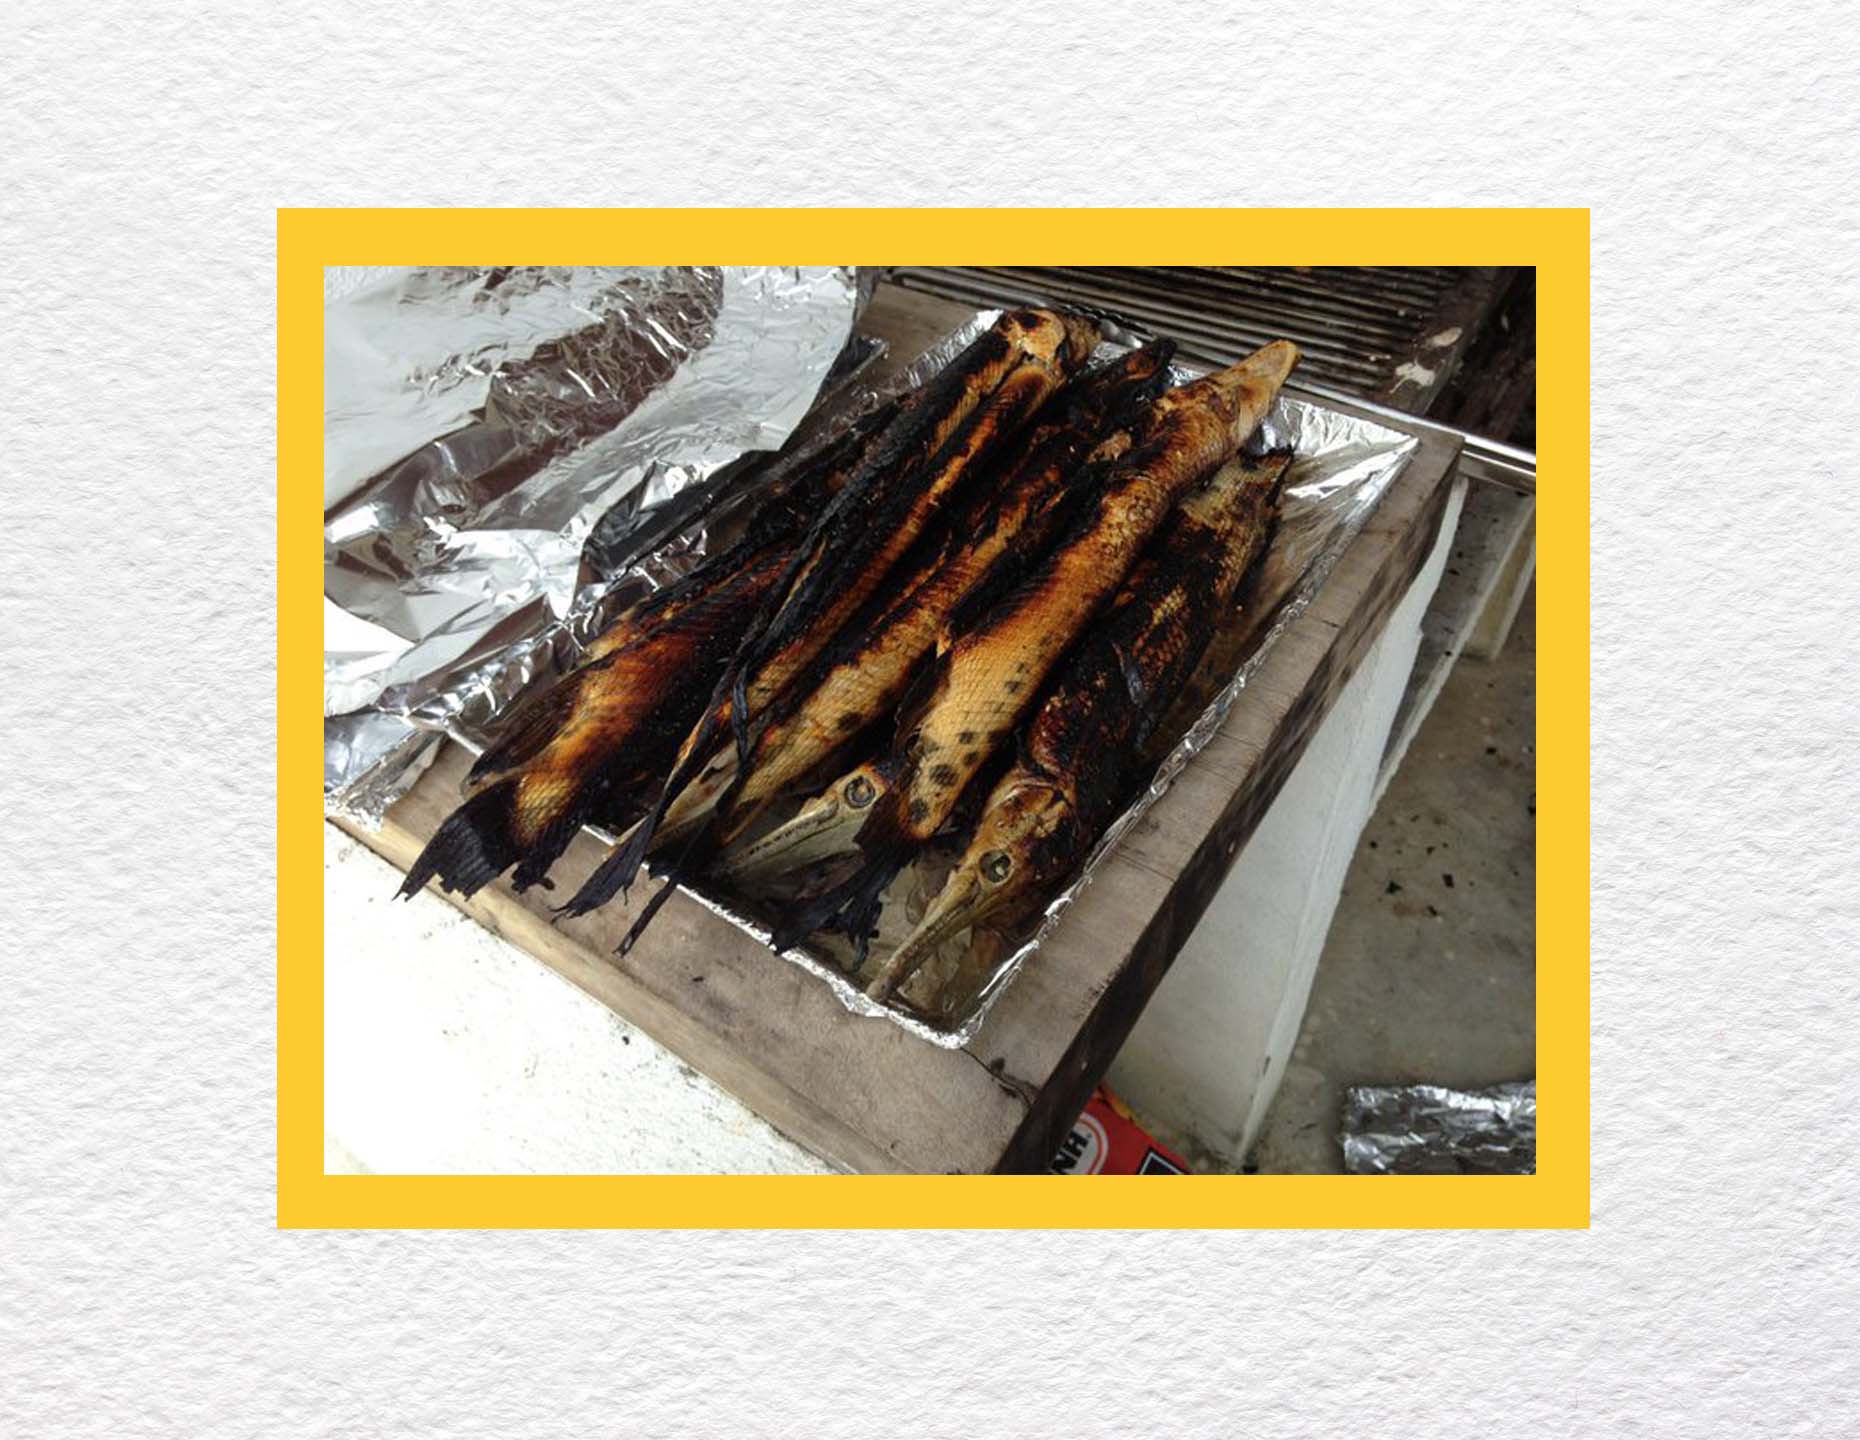 Grilled gar, a long-nosed fish species found in freshwater. October 2021